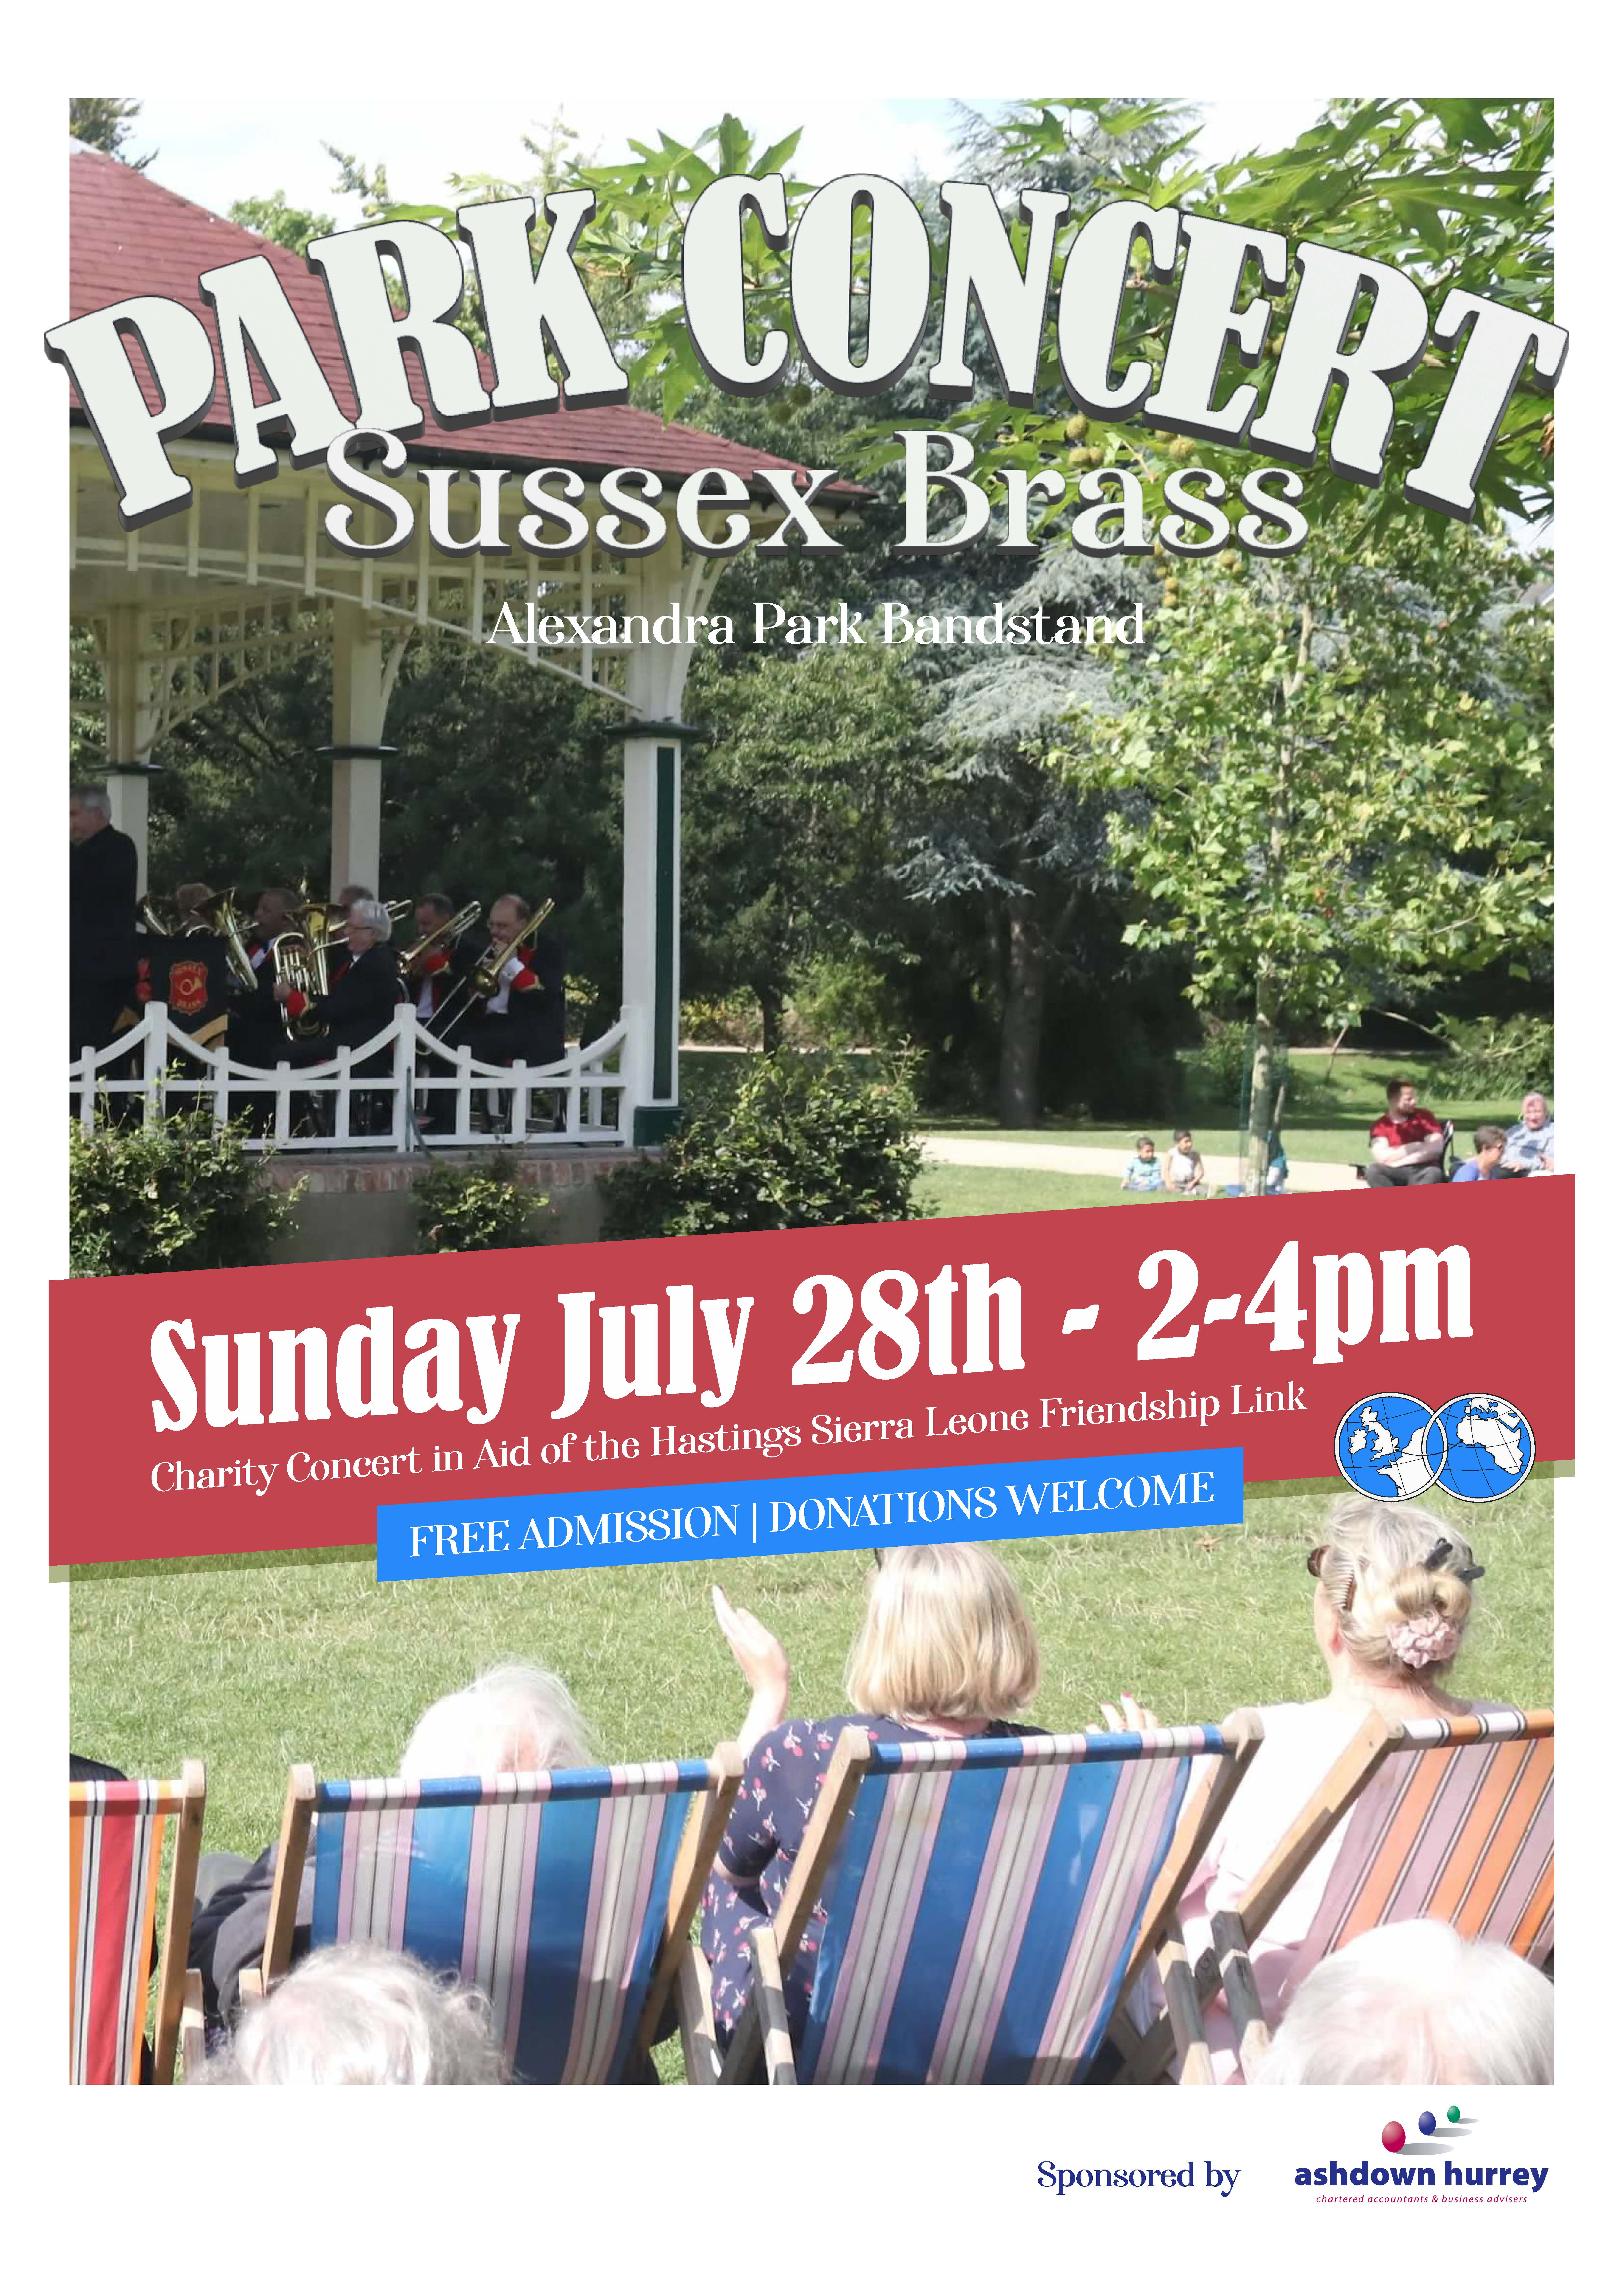 Sussex Brass Concert in the Park